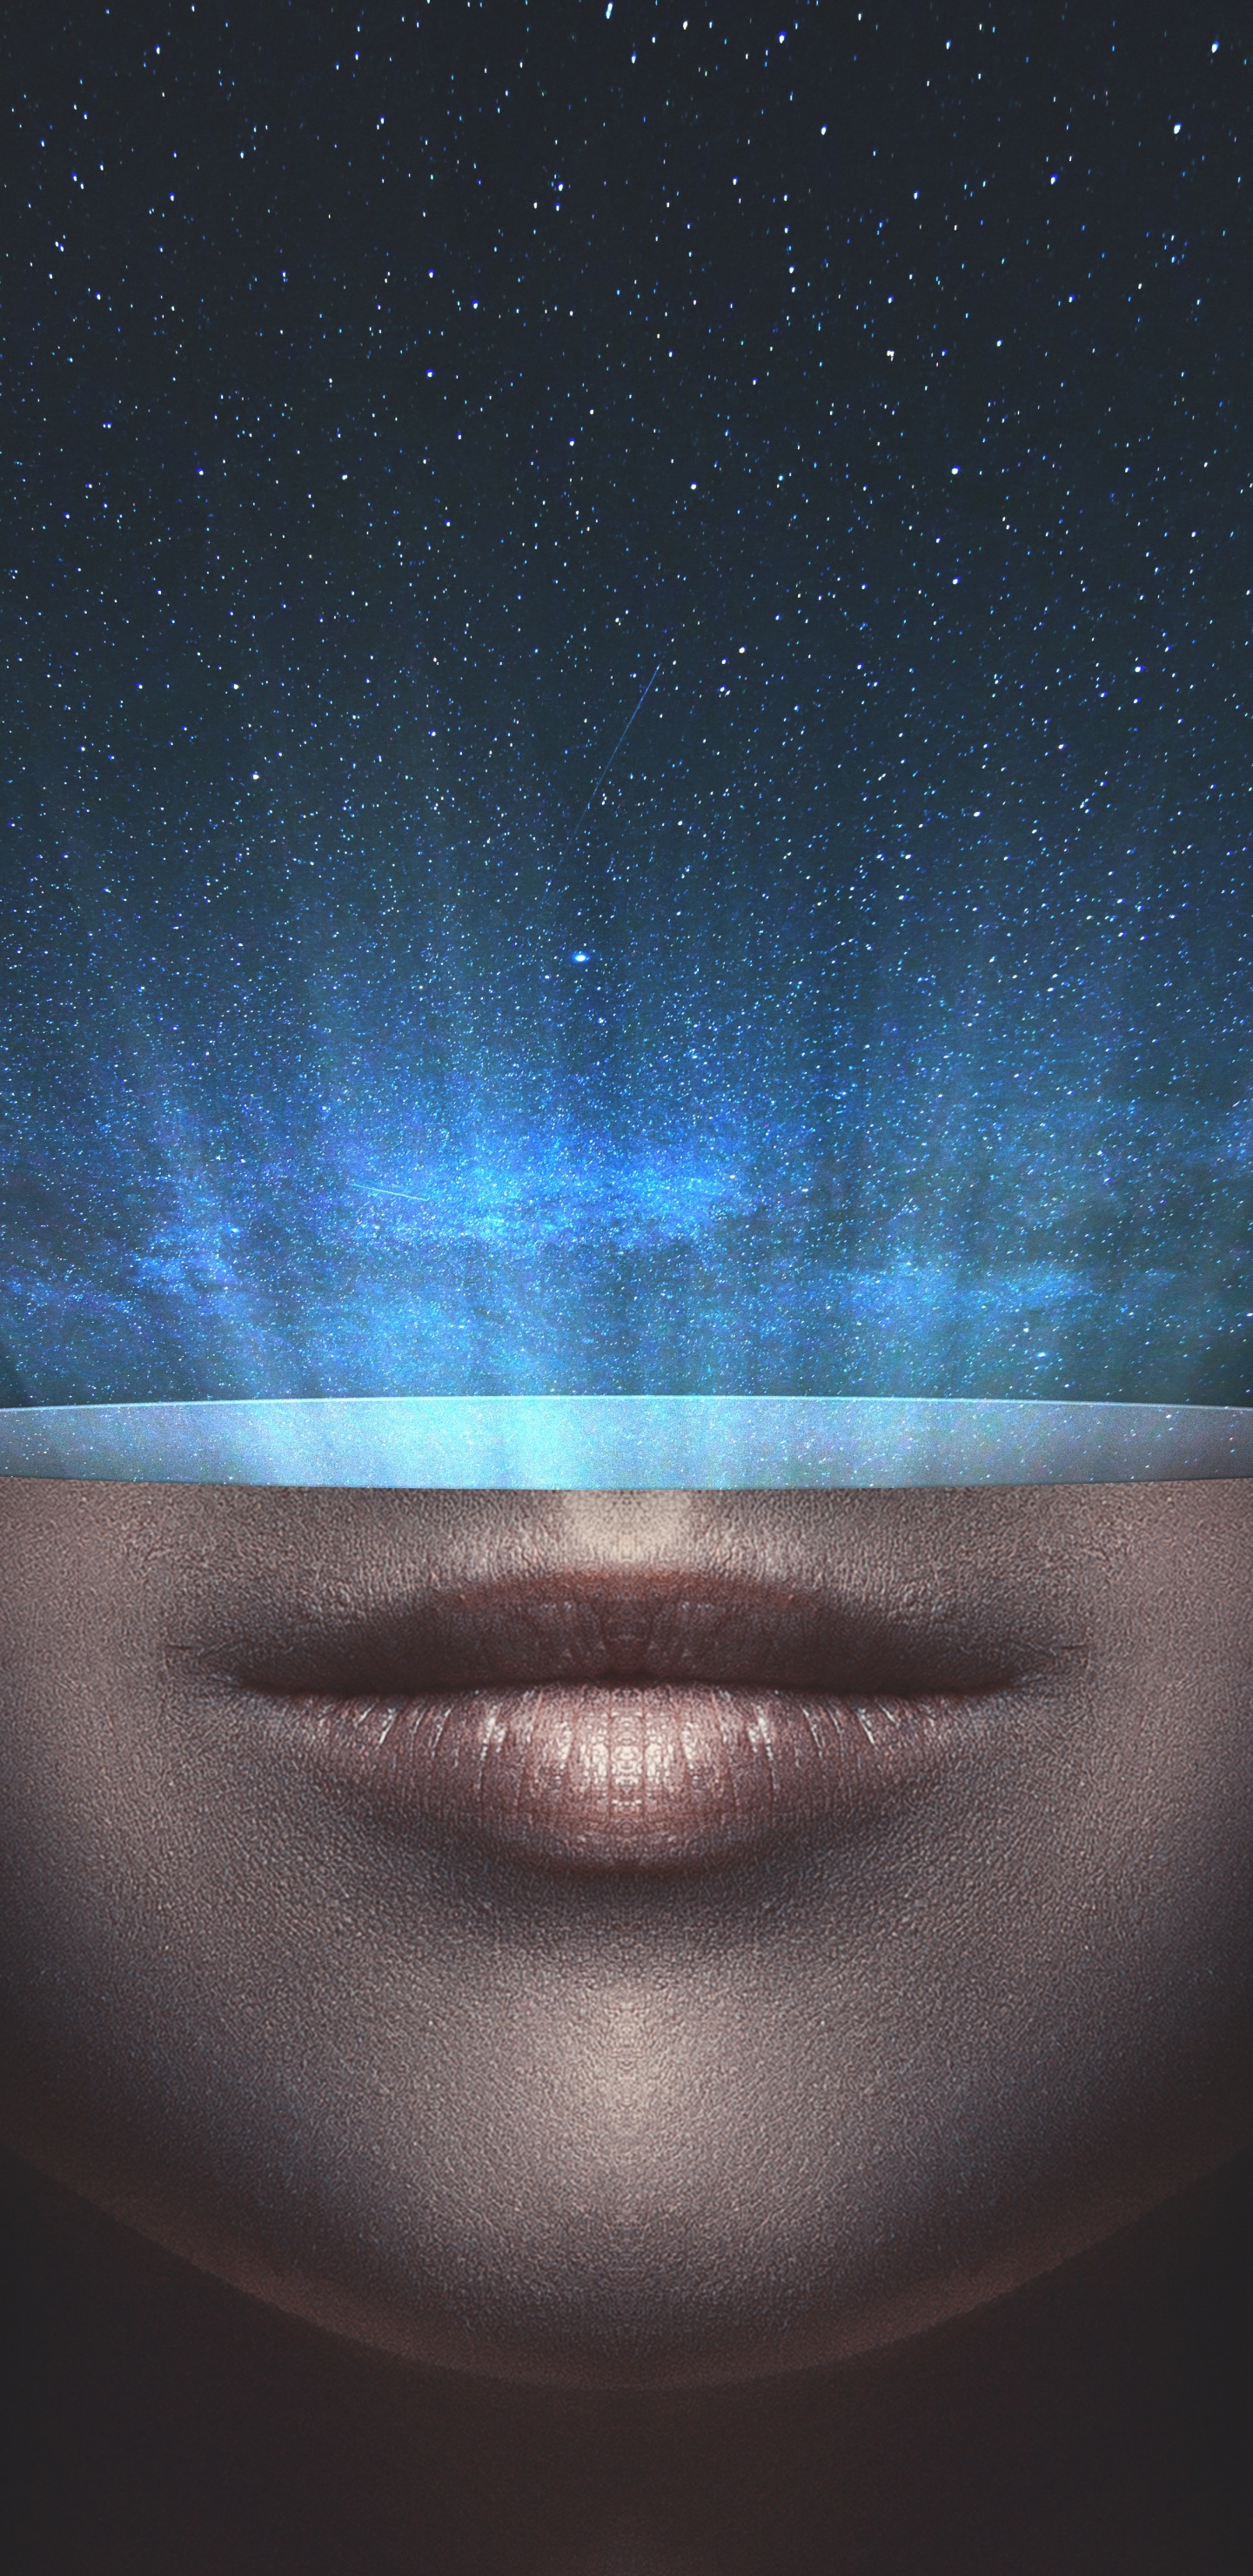 Persons Face With Blue and White Stars. Wallpaper in 1440x2960 Resolution